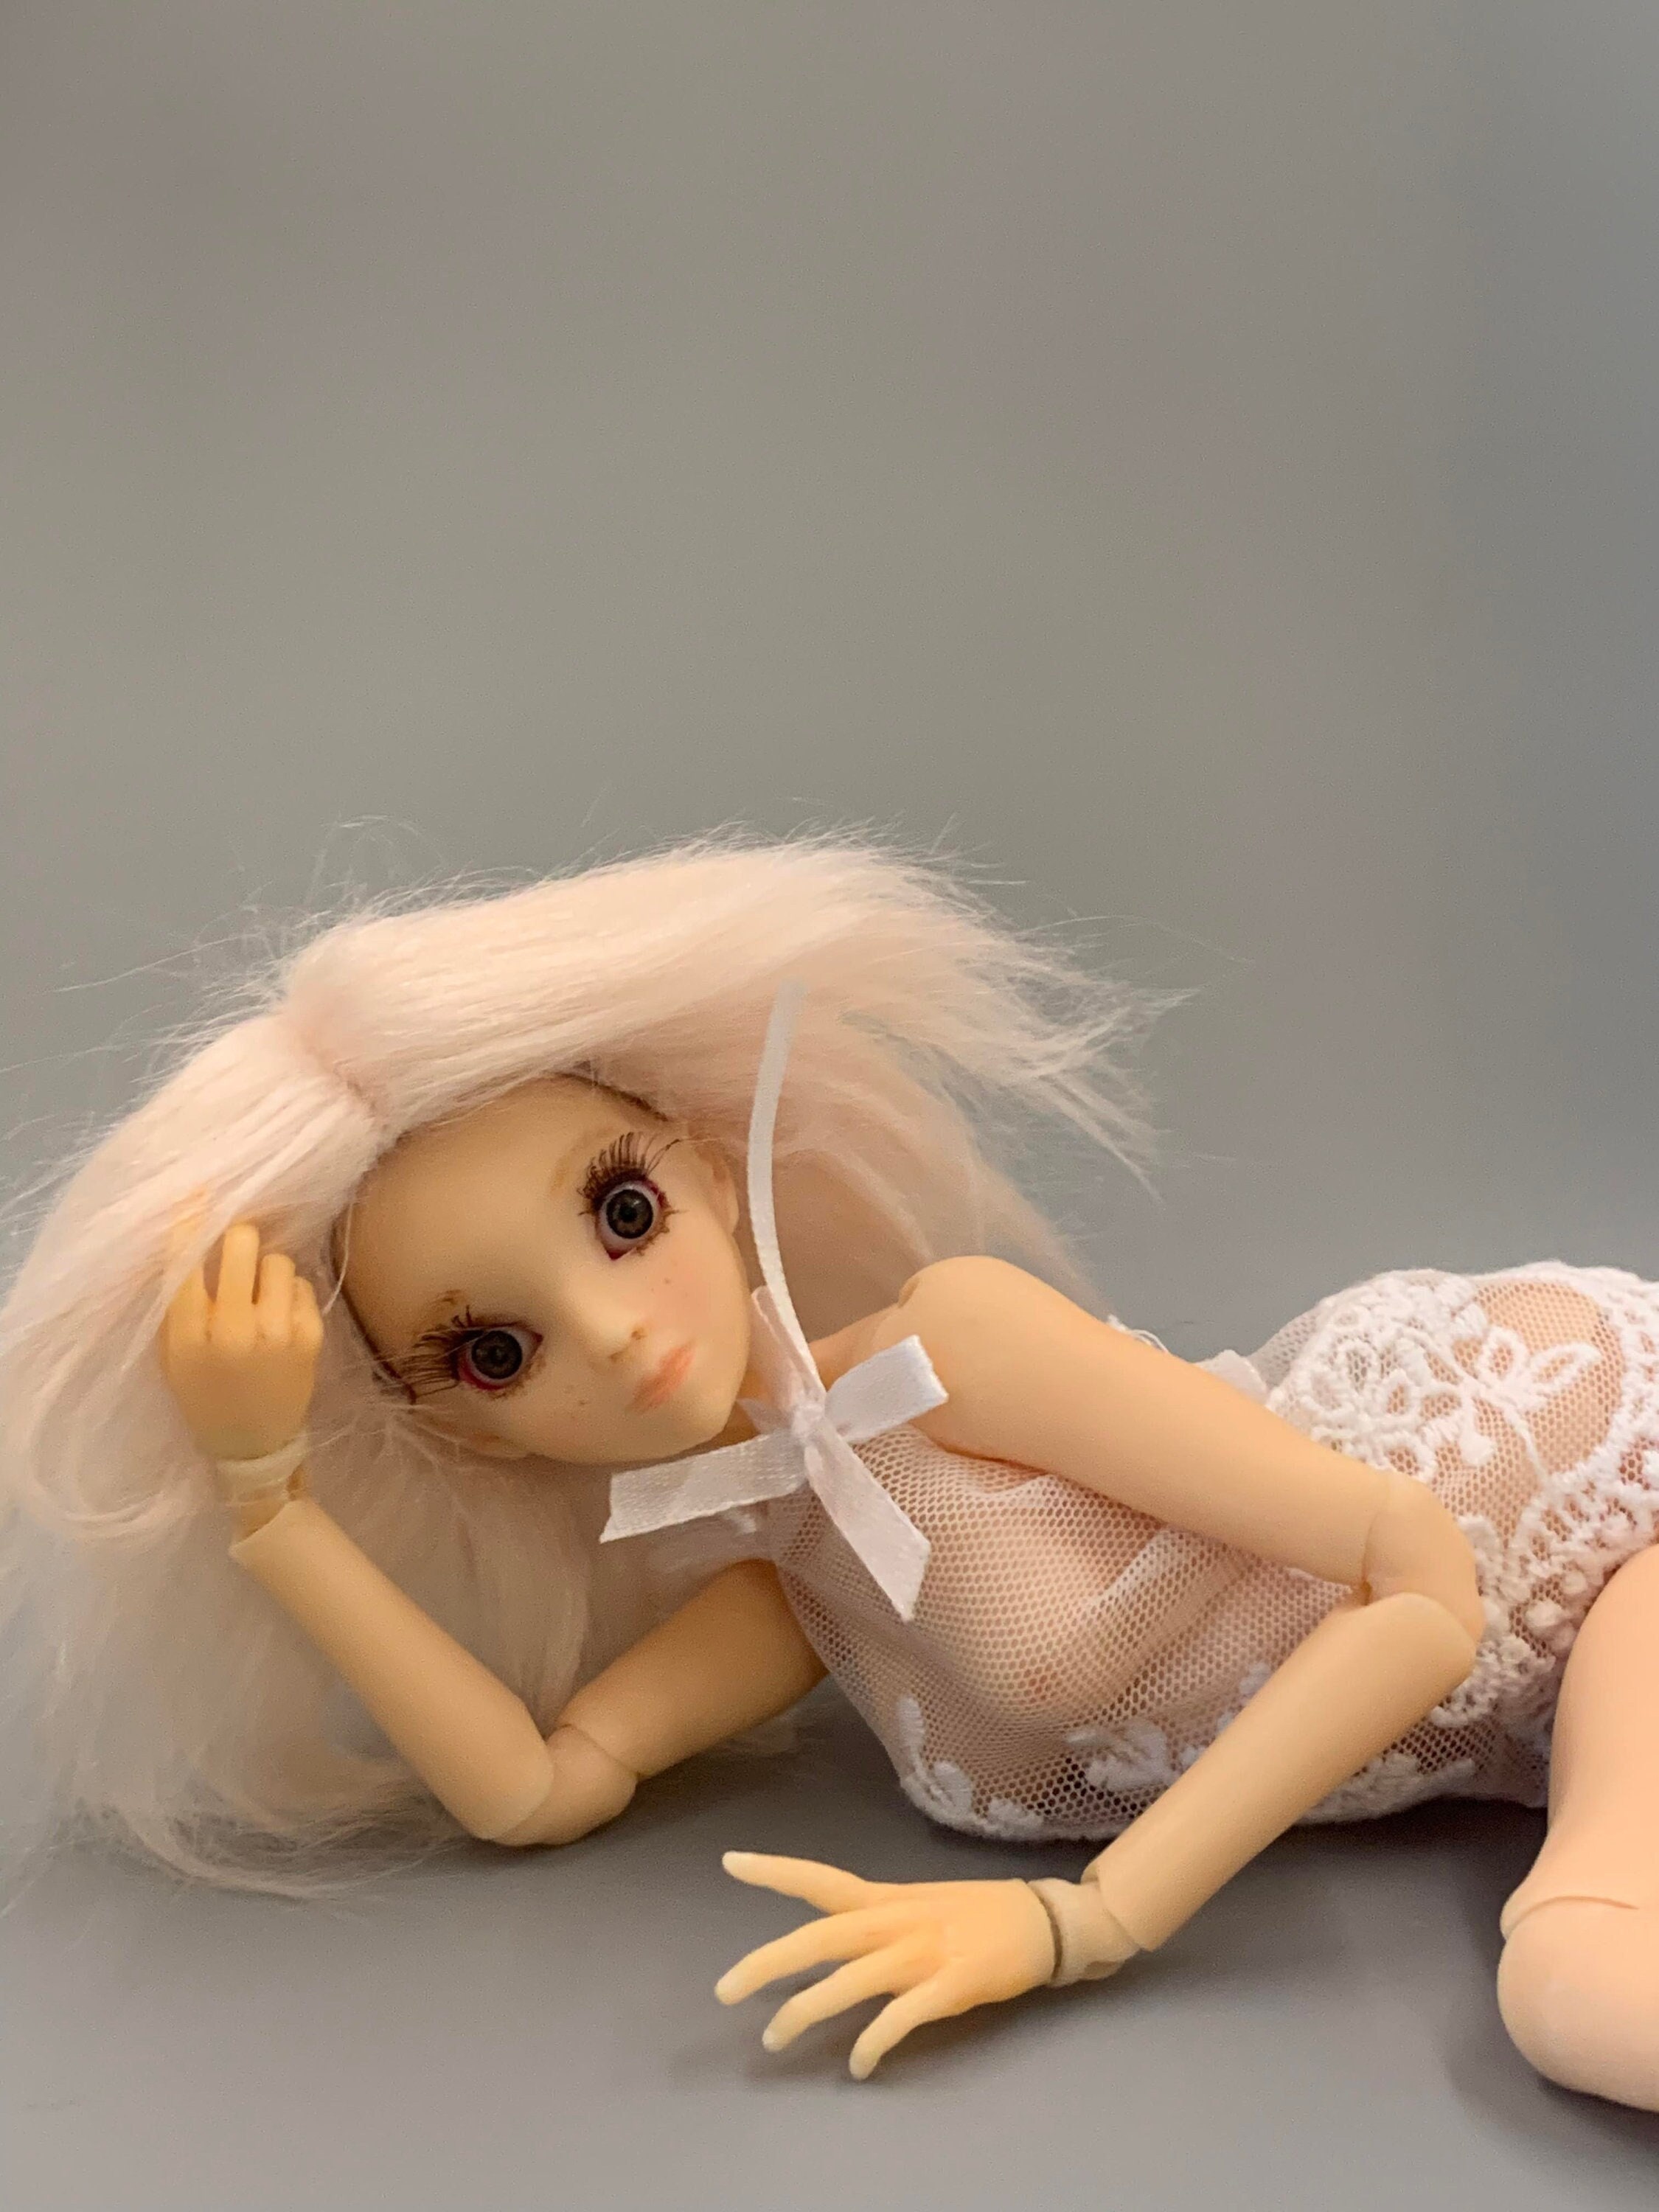 3D Printed PLA / Resin BJD Girl Ball Jointed Doll, 1/6 Yo-sd 30cm Assembled  Unpainted No Make up Doll 